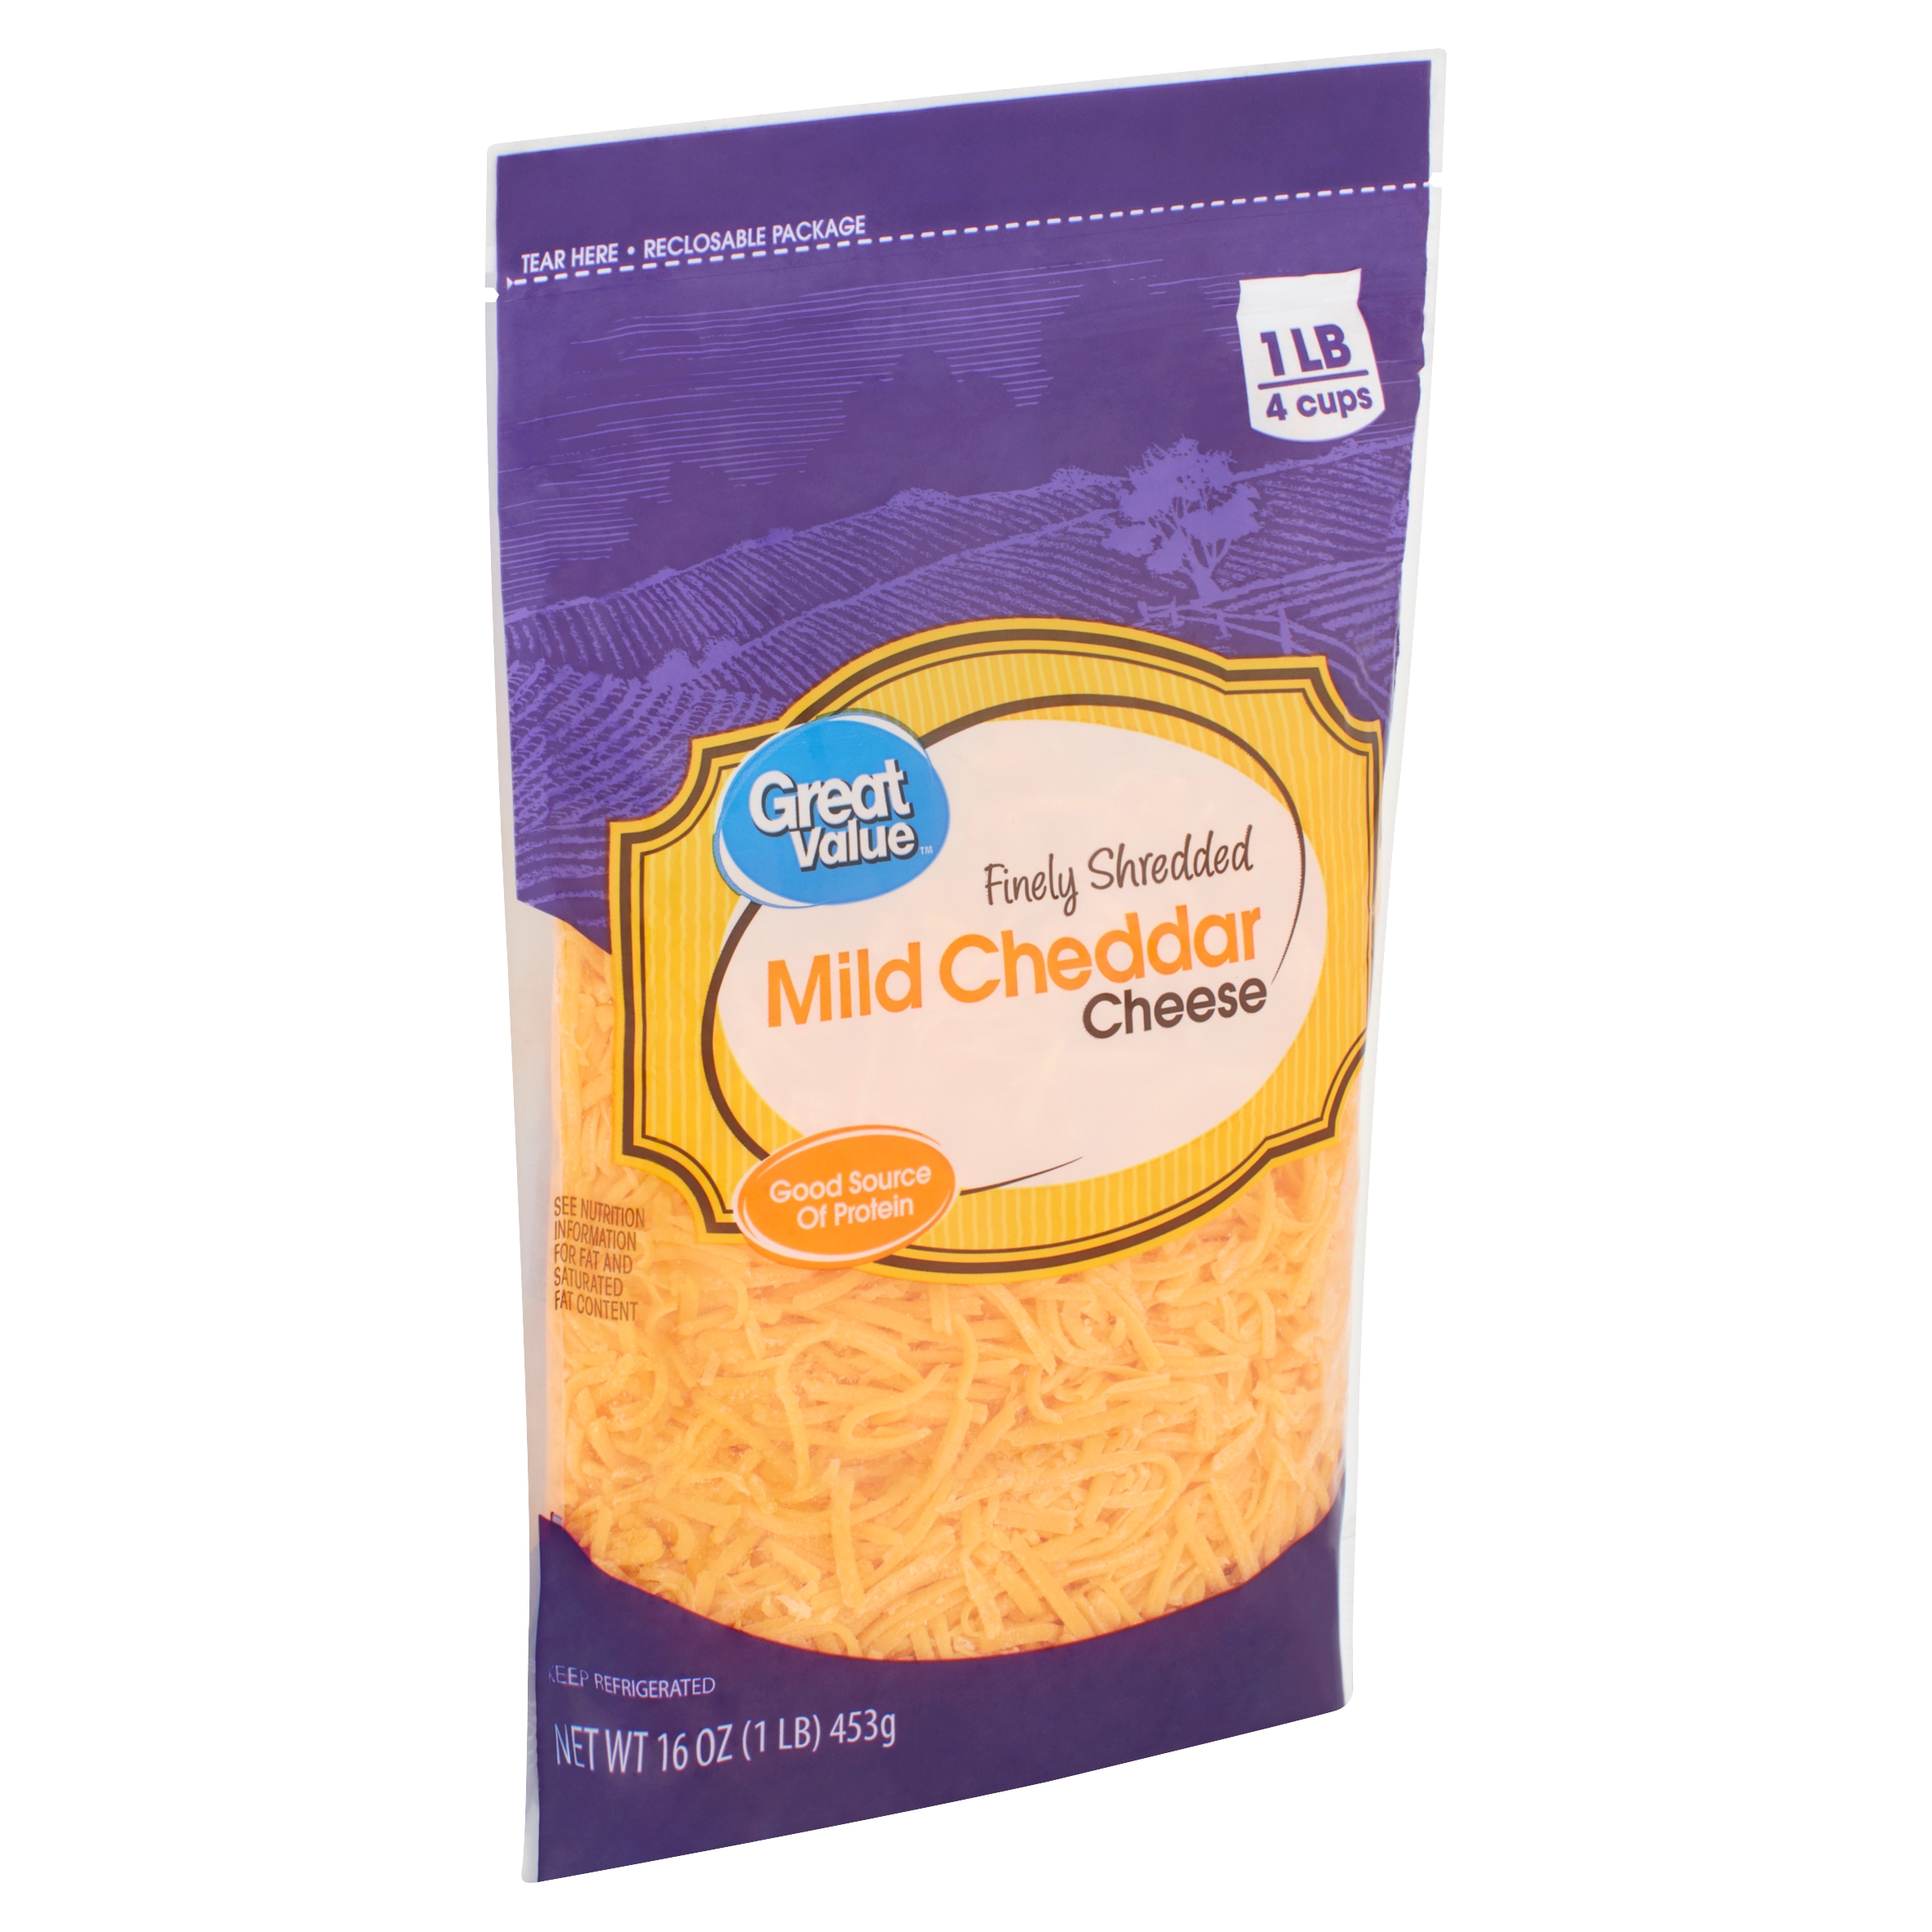 Great Value Finely Shredded Mild Cheddar Cheese, 16 Oz Image